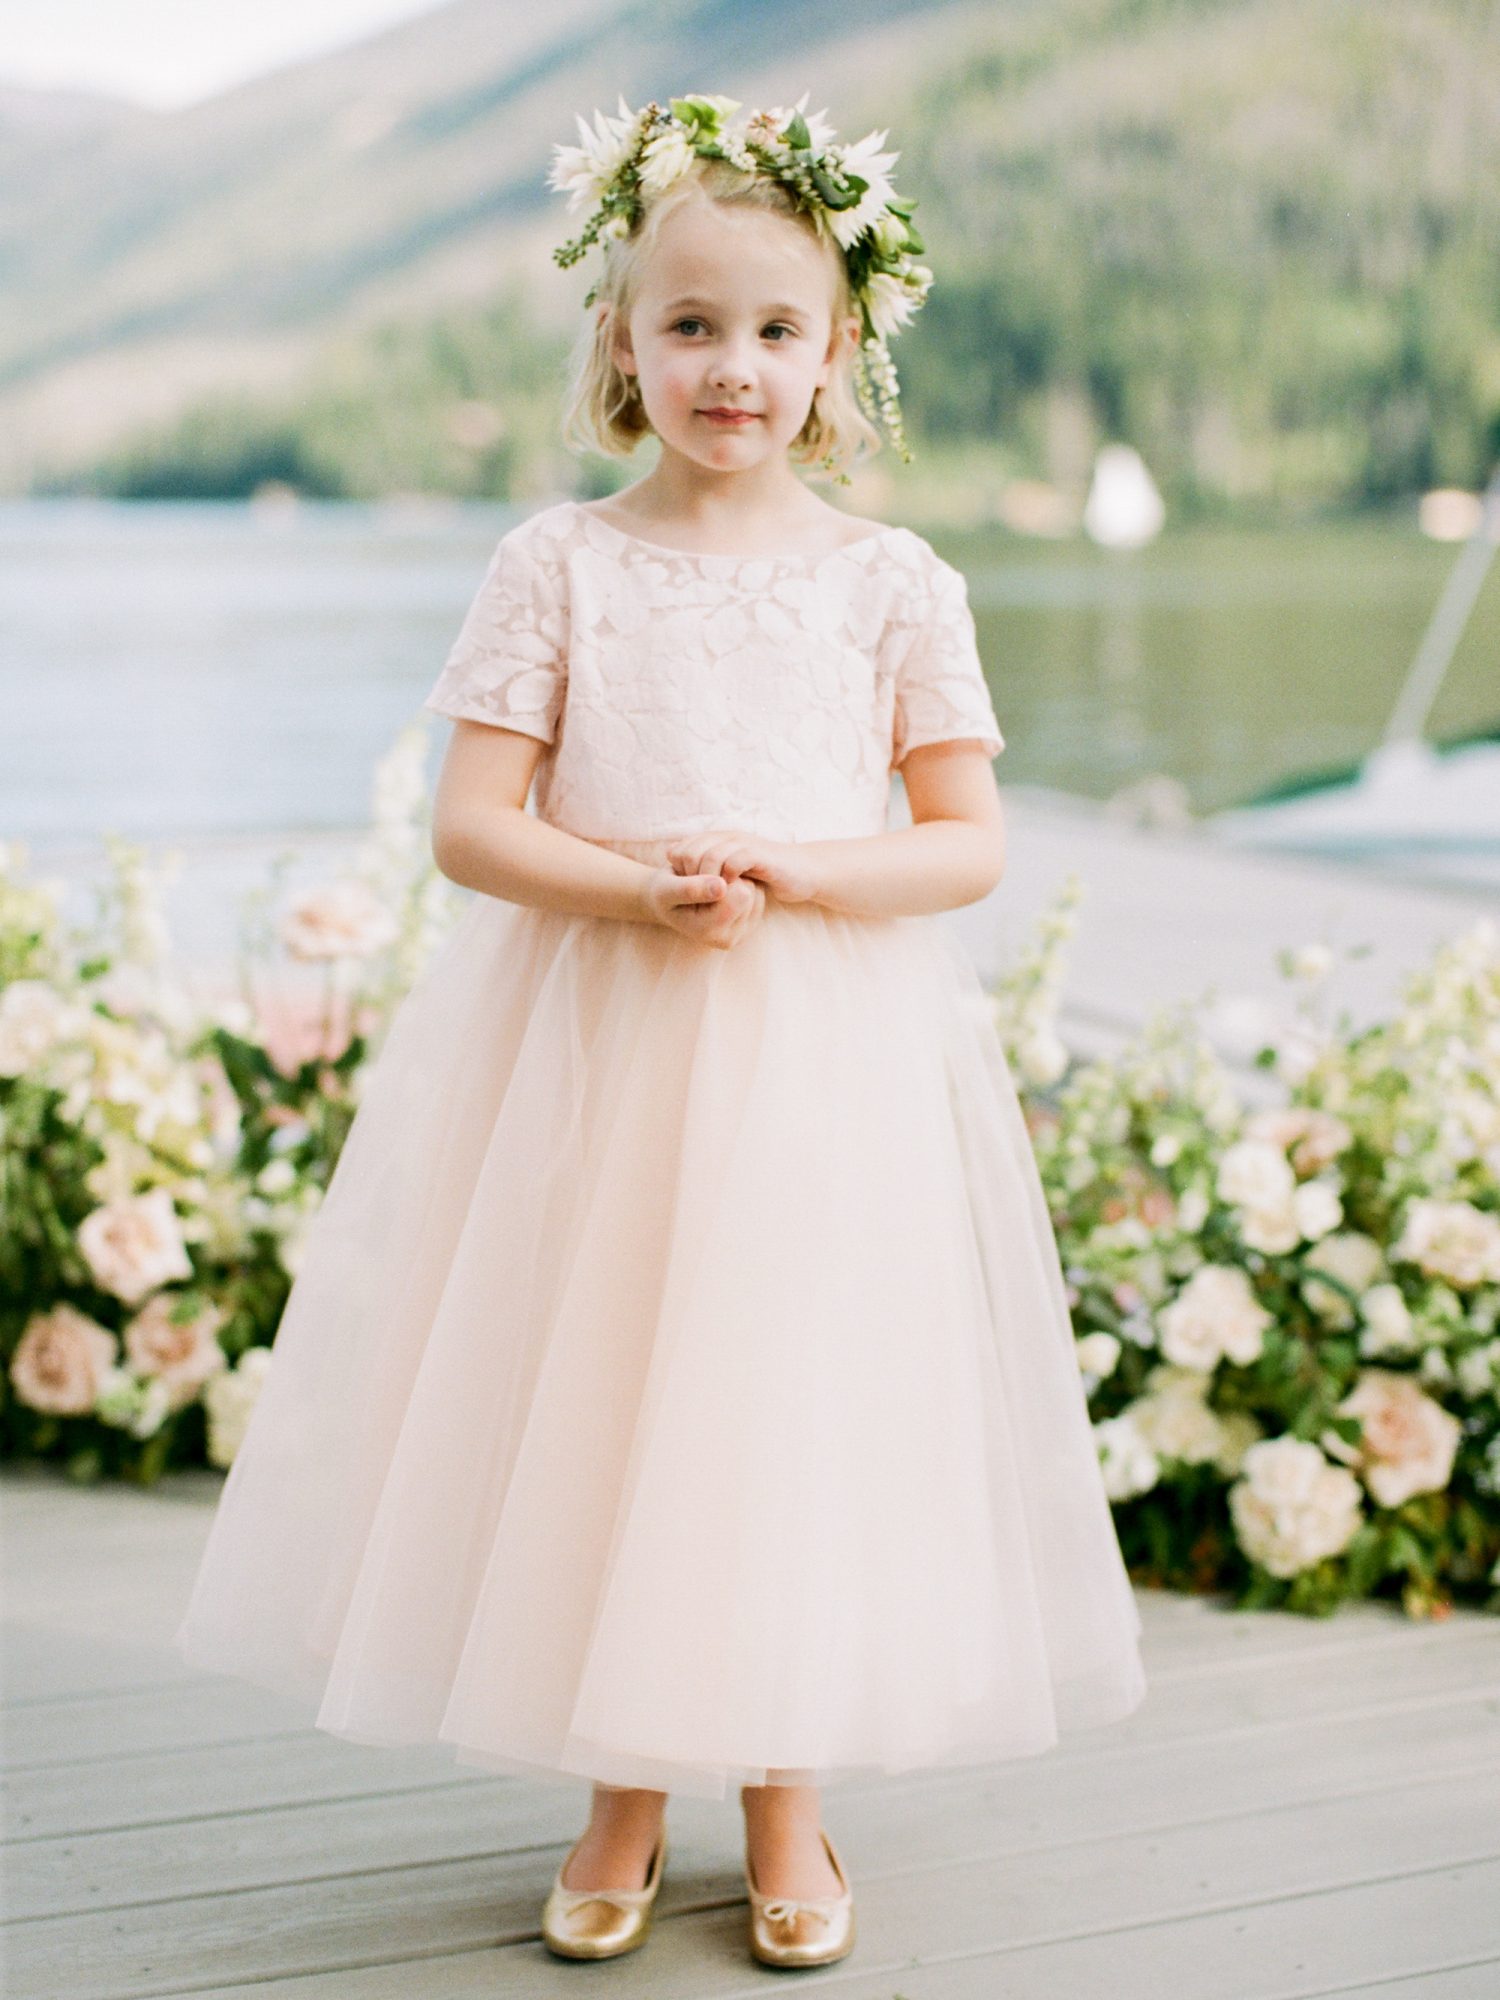 Flower girl with floral crown. Photo Rachel Havel